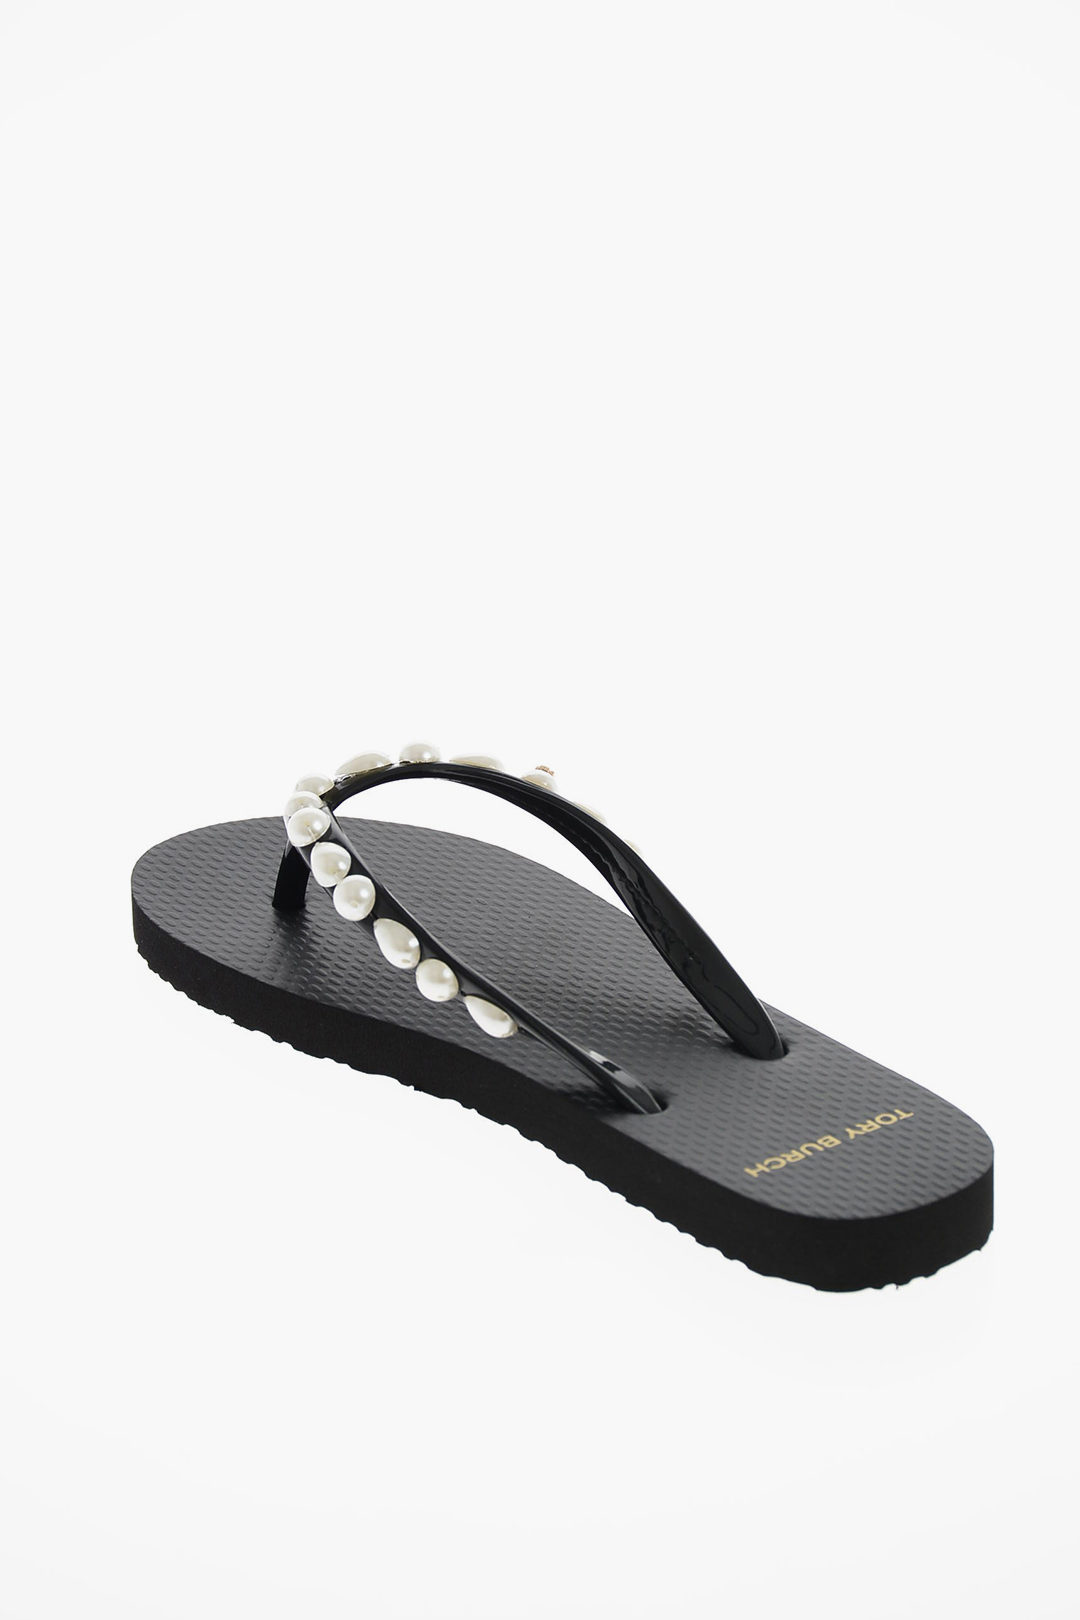 Tory Burch Rubber Flip flops with pearl detail women - Glamood Outlet